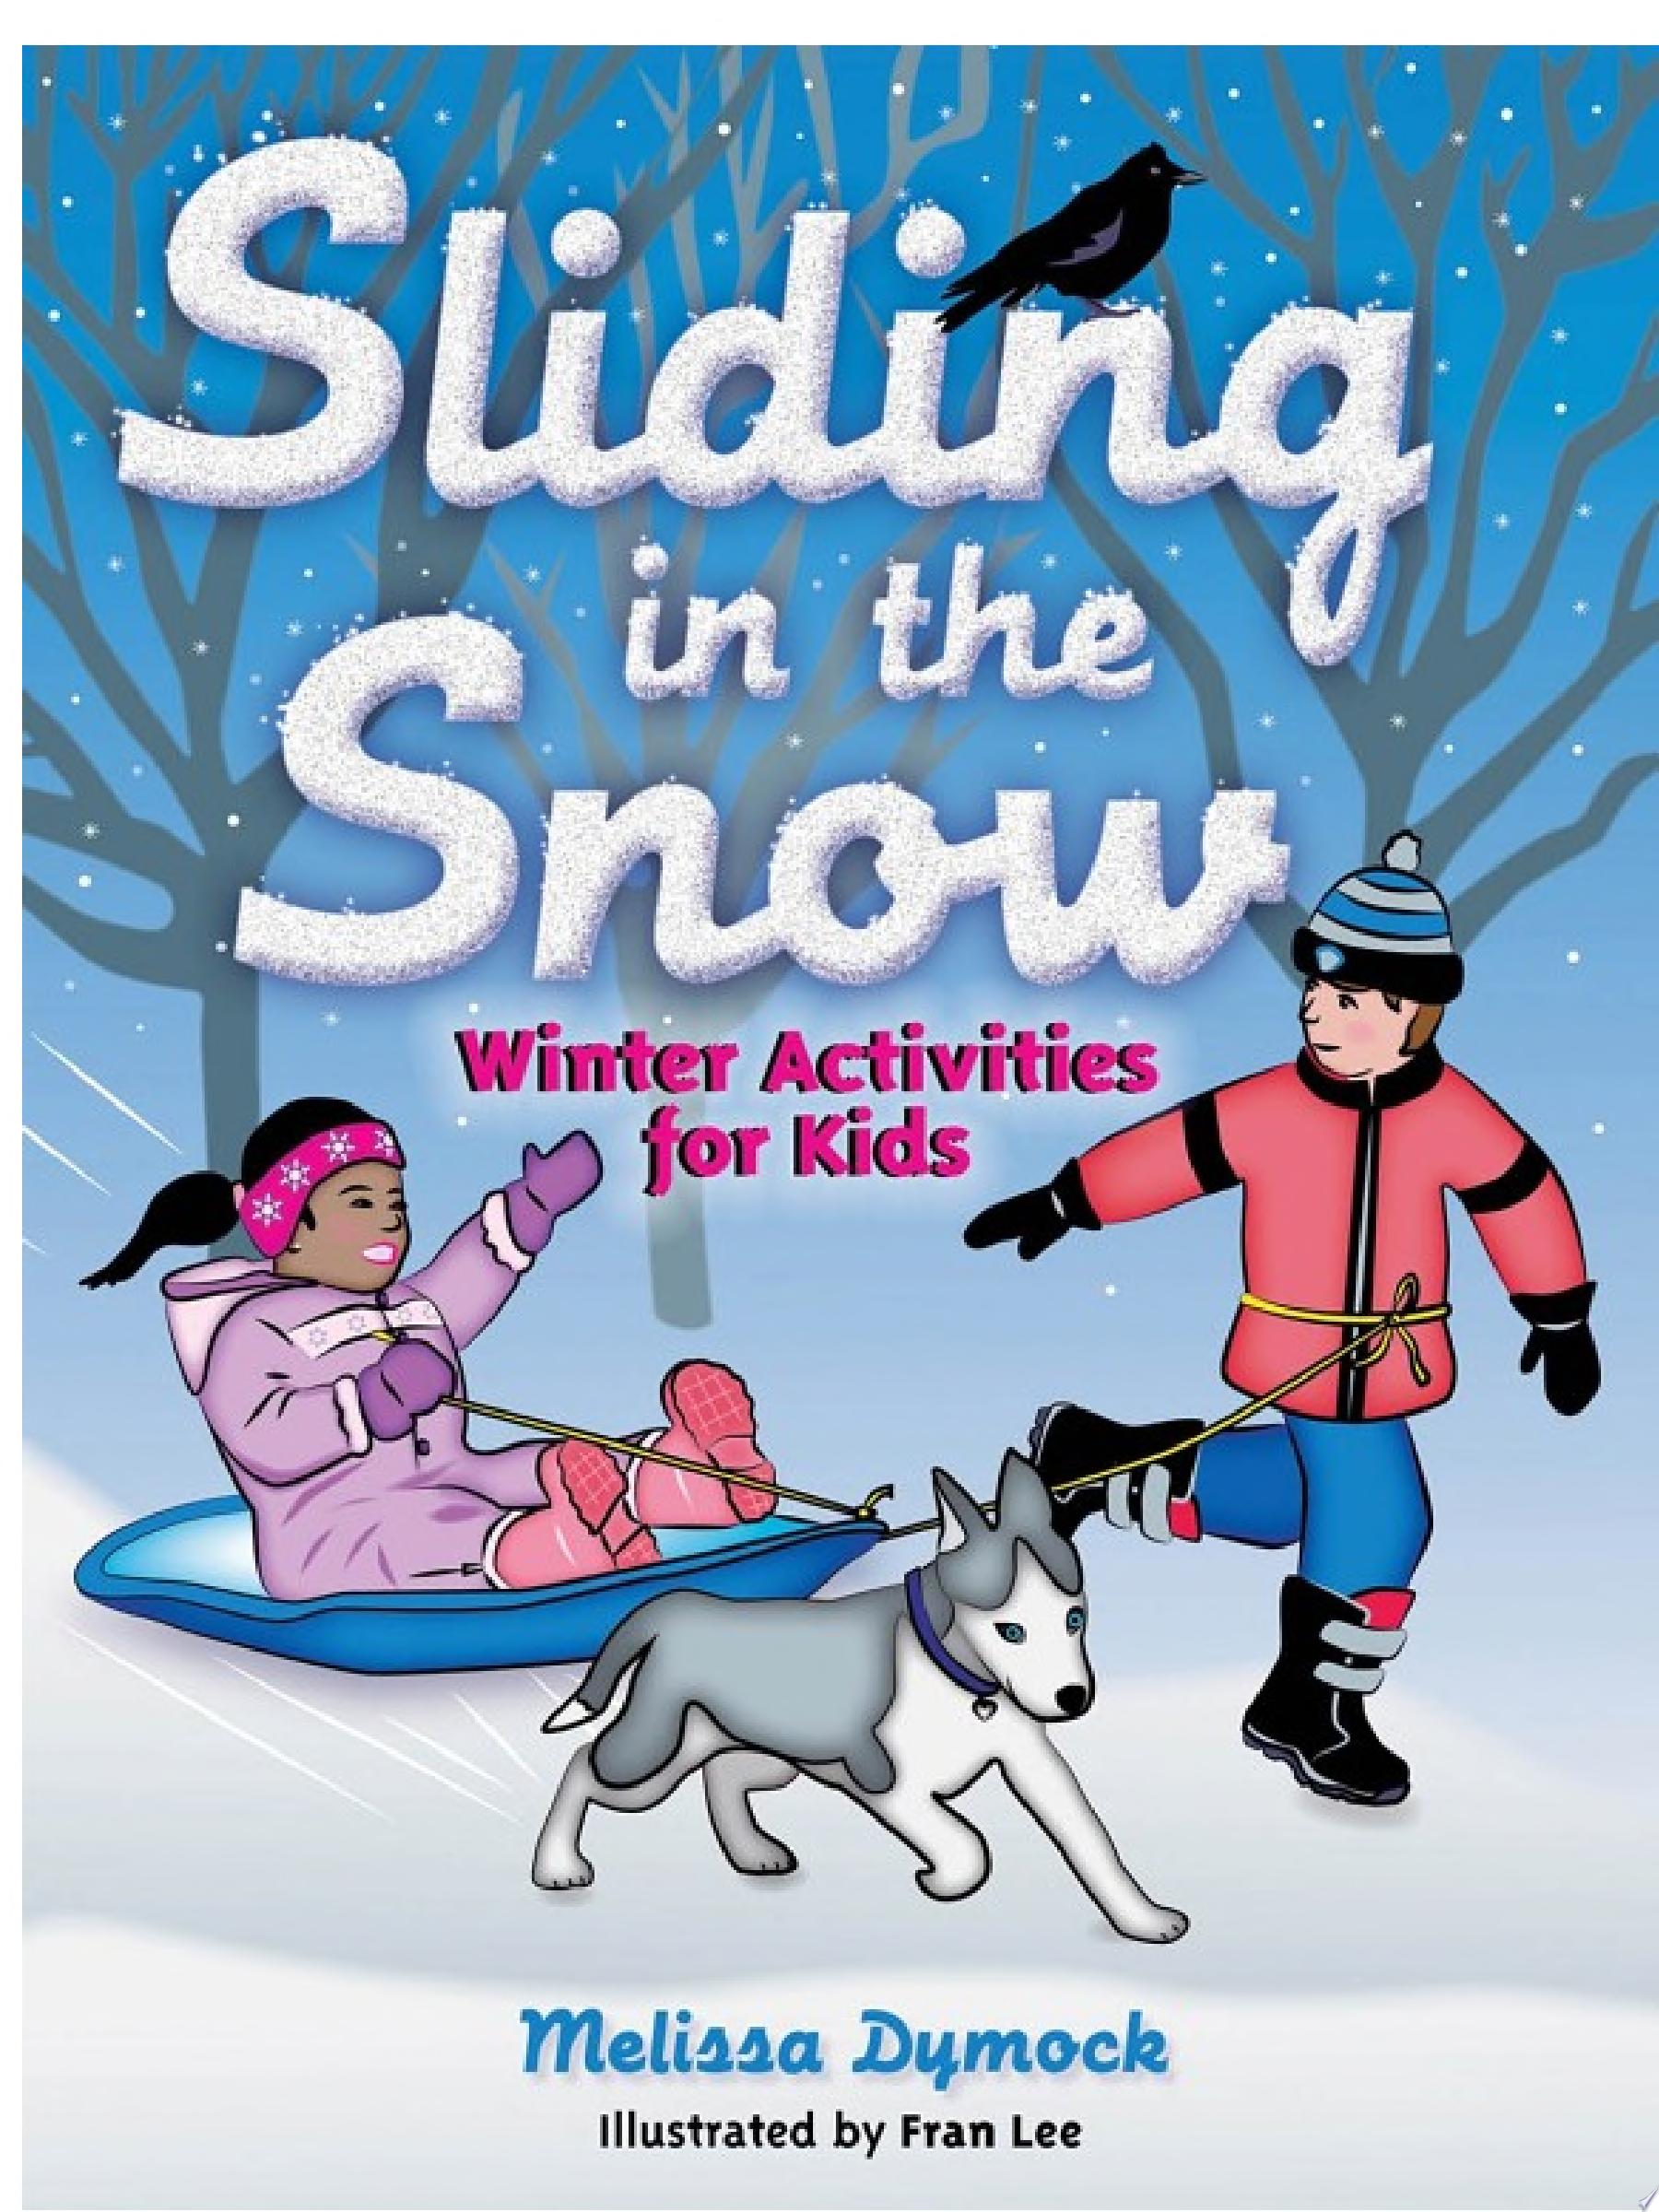 Image for "Sliding in the Snow"